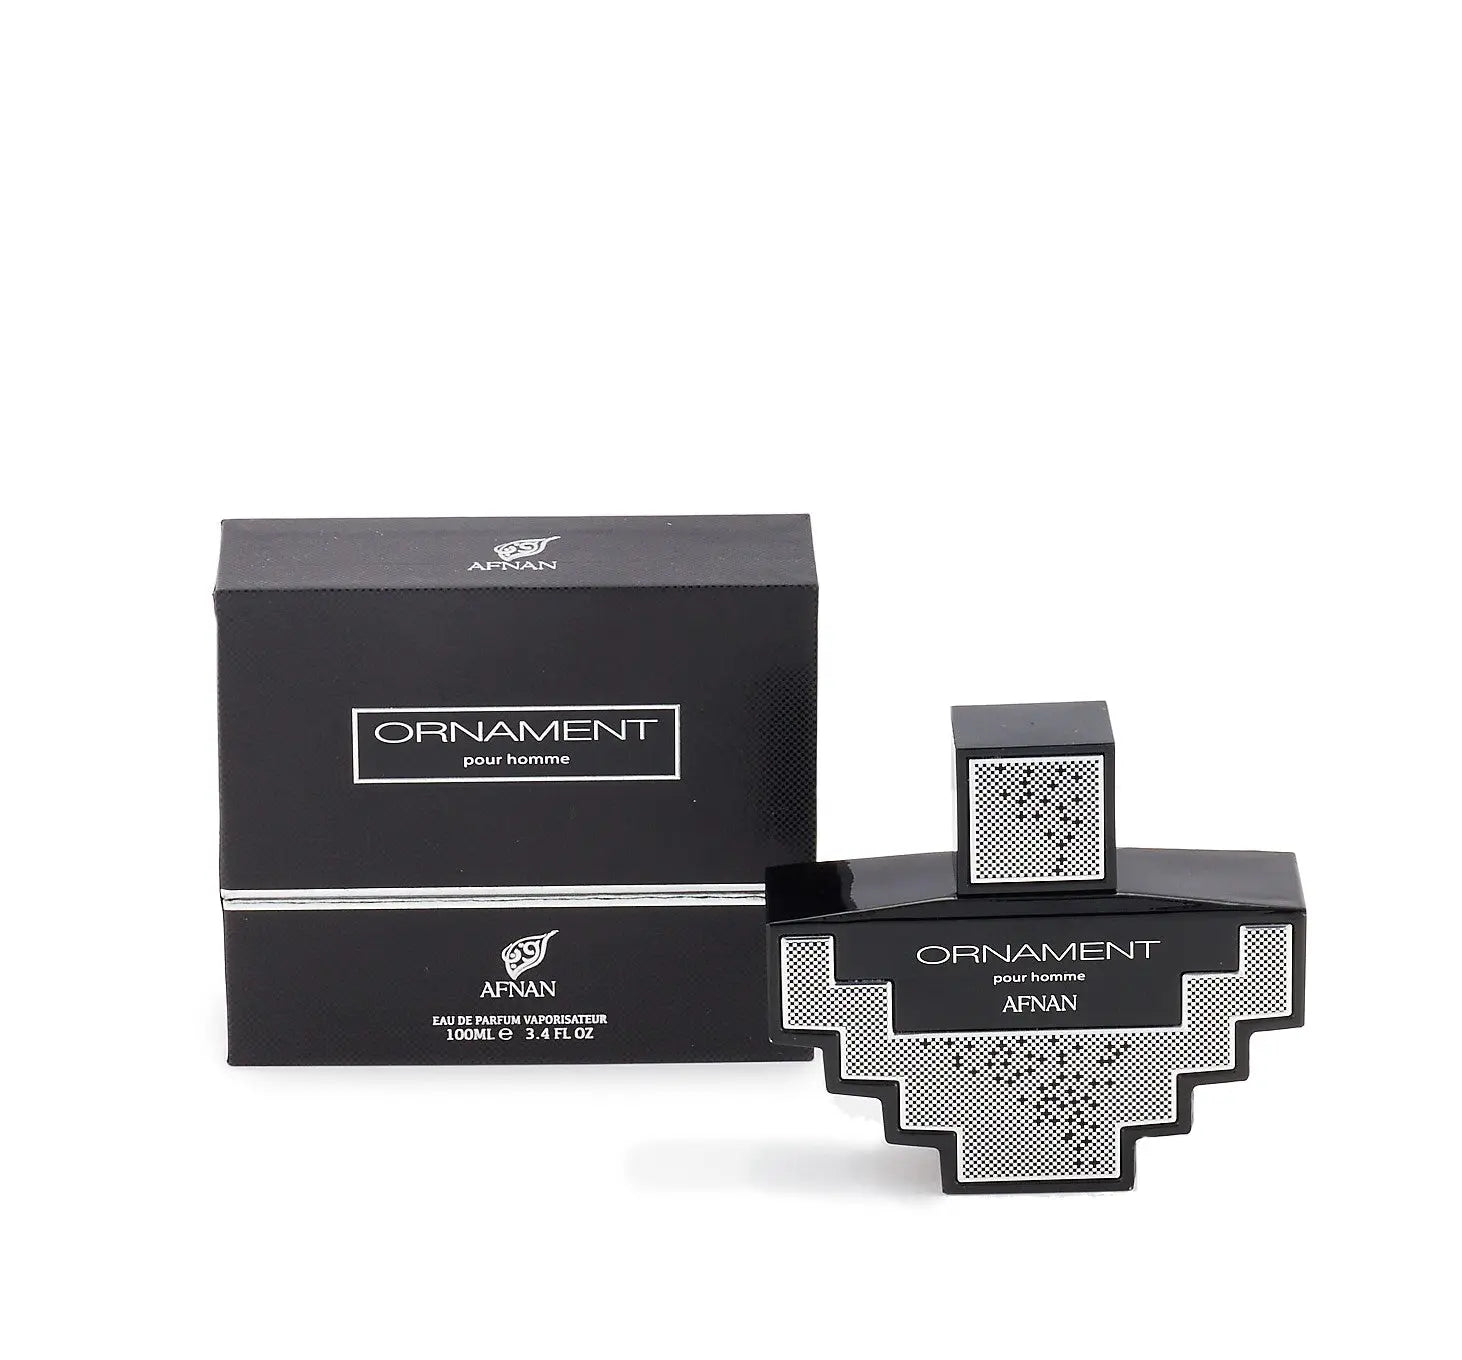 The image depicts a black and silver geometric-shaped perfume bottle with the label "ORNAMENT pour homme AFNAN" next to its packaging. The packaging box is black with a silver band and the same branding as the bottle. The text "Eau de Parfum Vaporisateur 100ML e 3.4 FL OZ" is visible, detailing the product's type and quantity. The design is sleek, modern, and suggests a masculine fragrance.